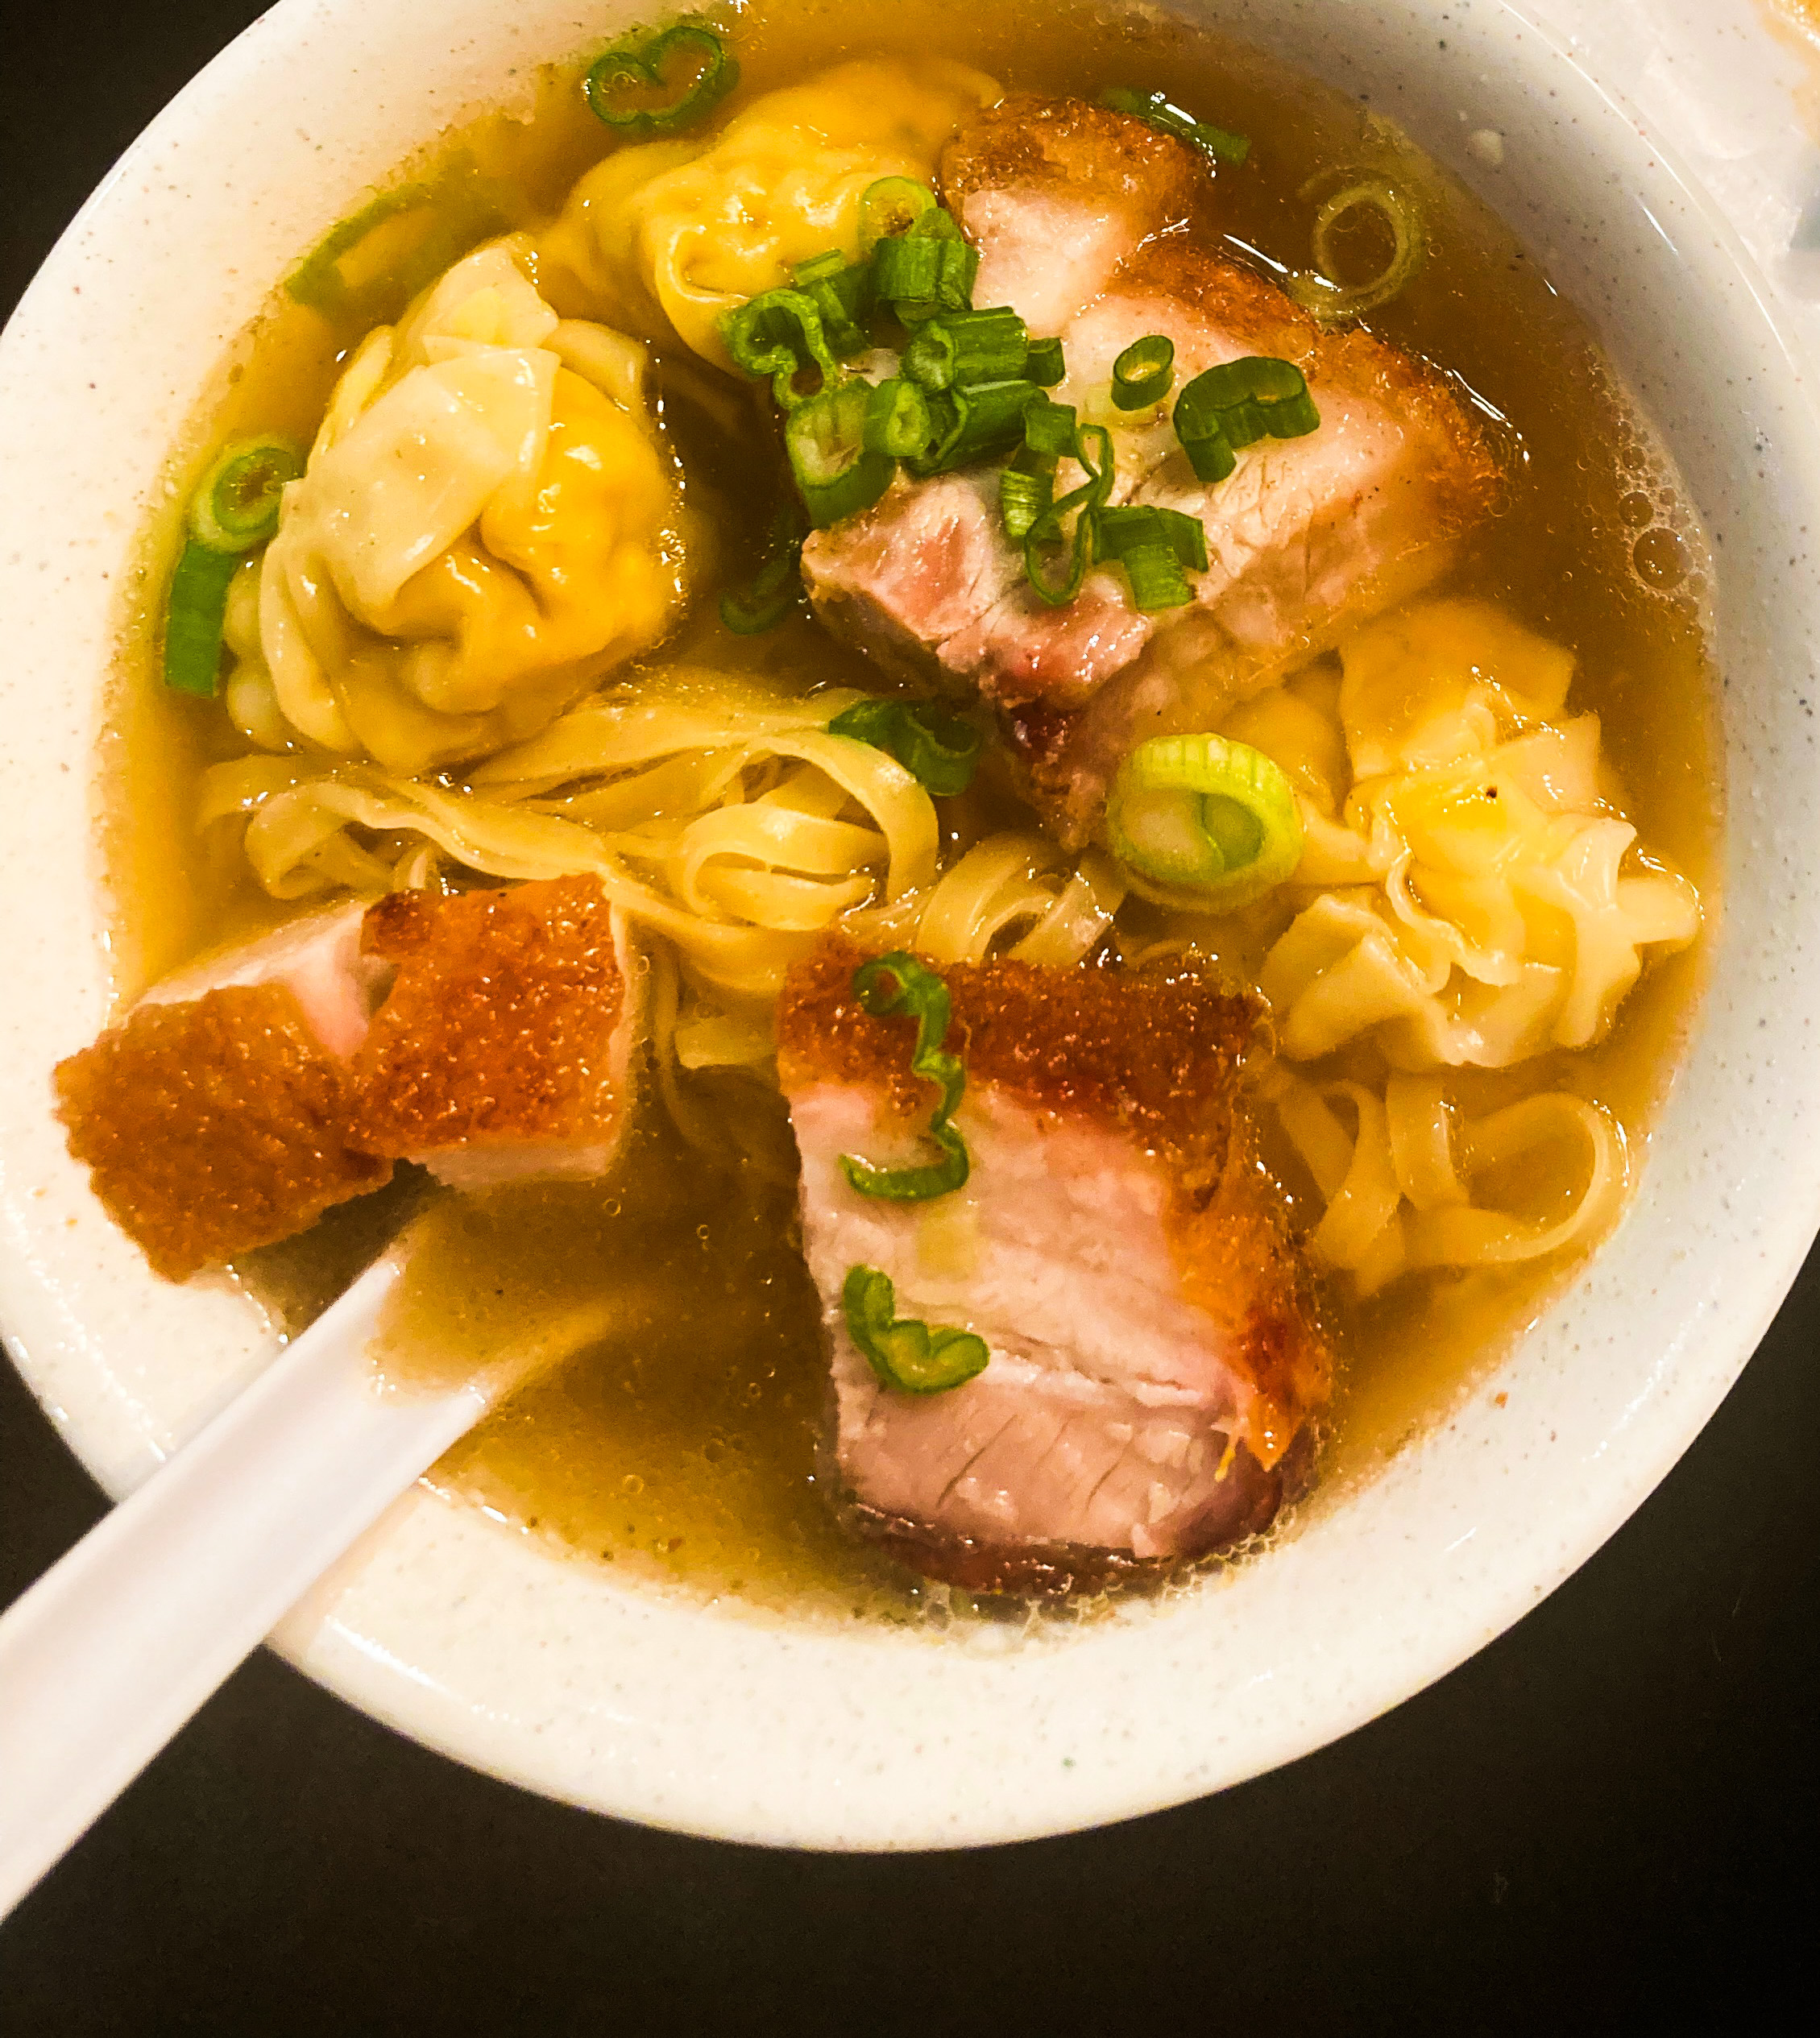 Pieces of pork float among egg noodles and wontons in a bowl of soup from Fortune BBQ Noodle House in Portland.